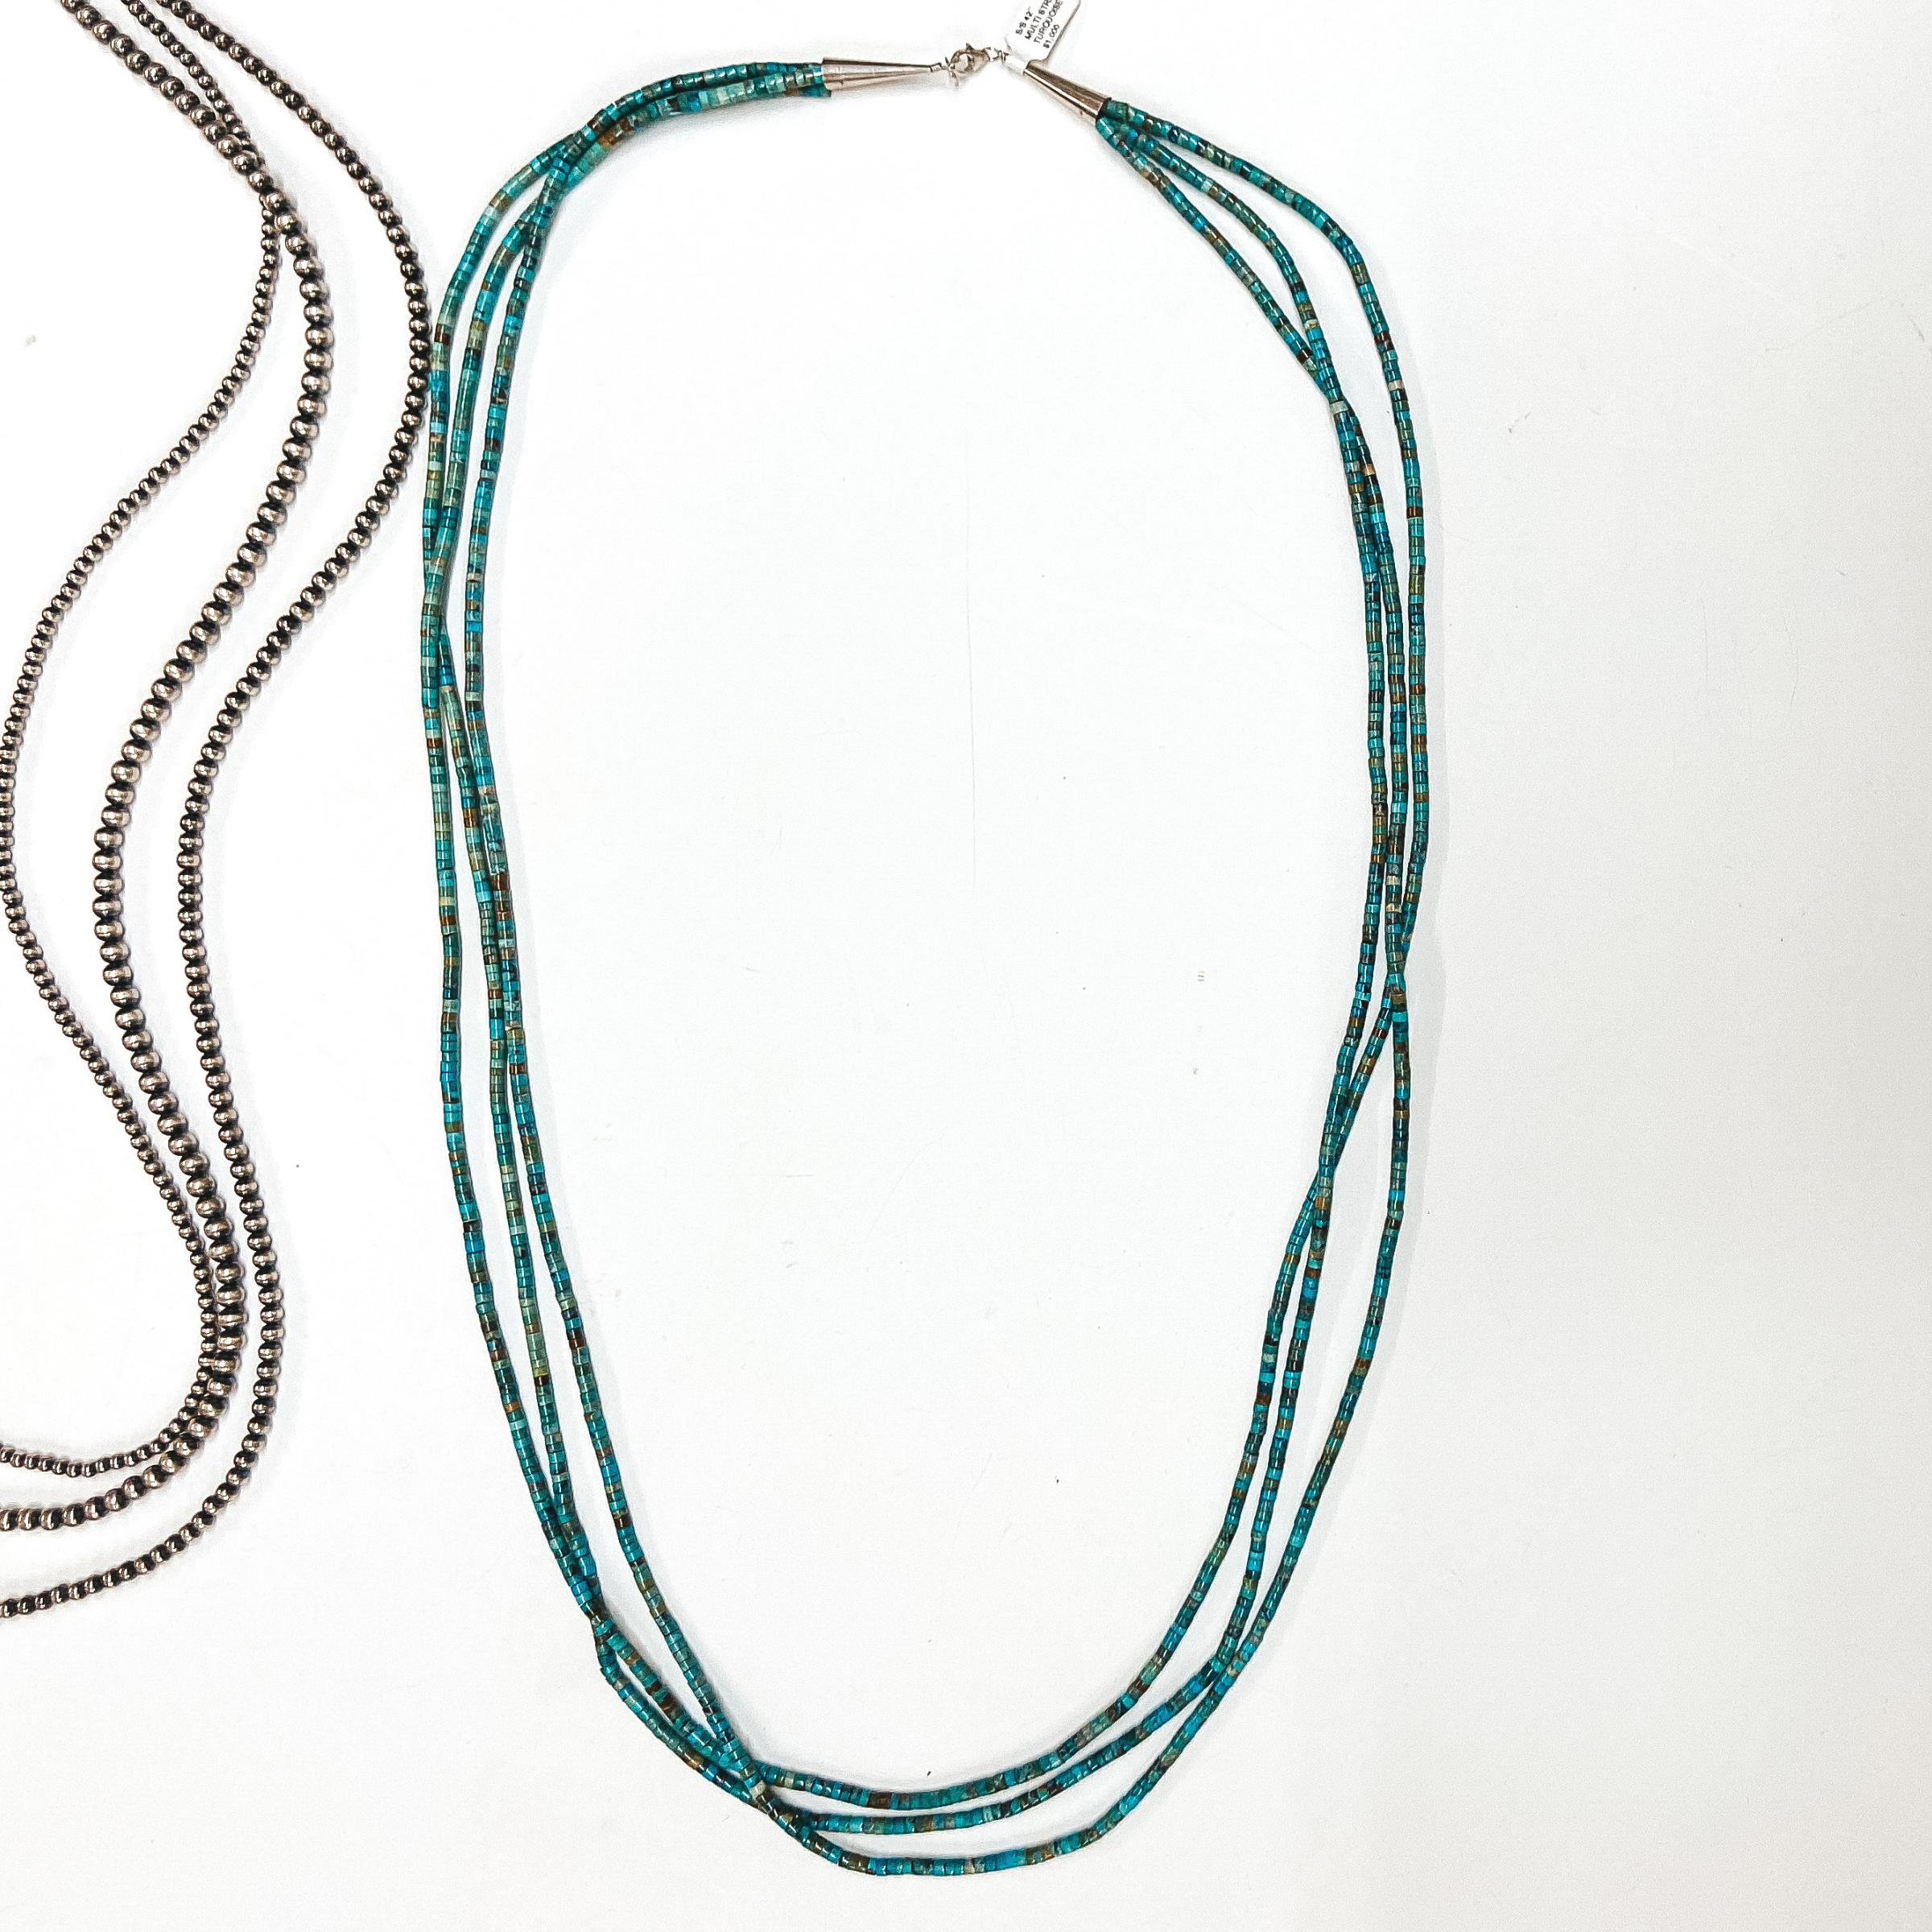 A three strand turquoise chip necklace with sterling silver clasp. Pictured on white background with Navajo Pearls.